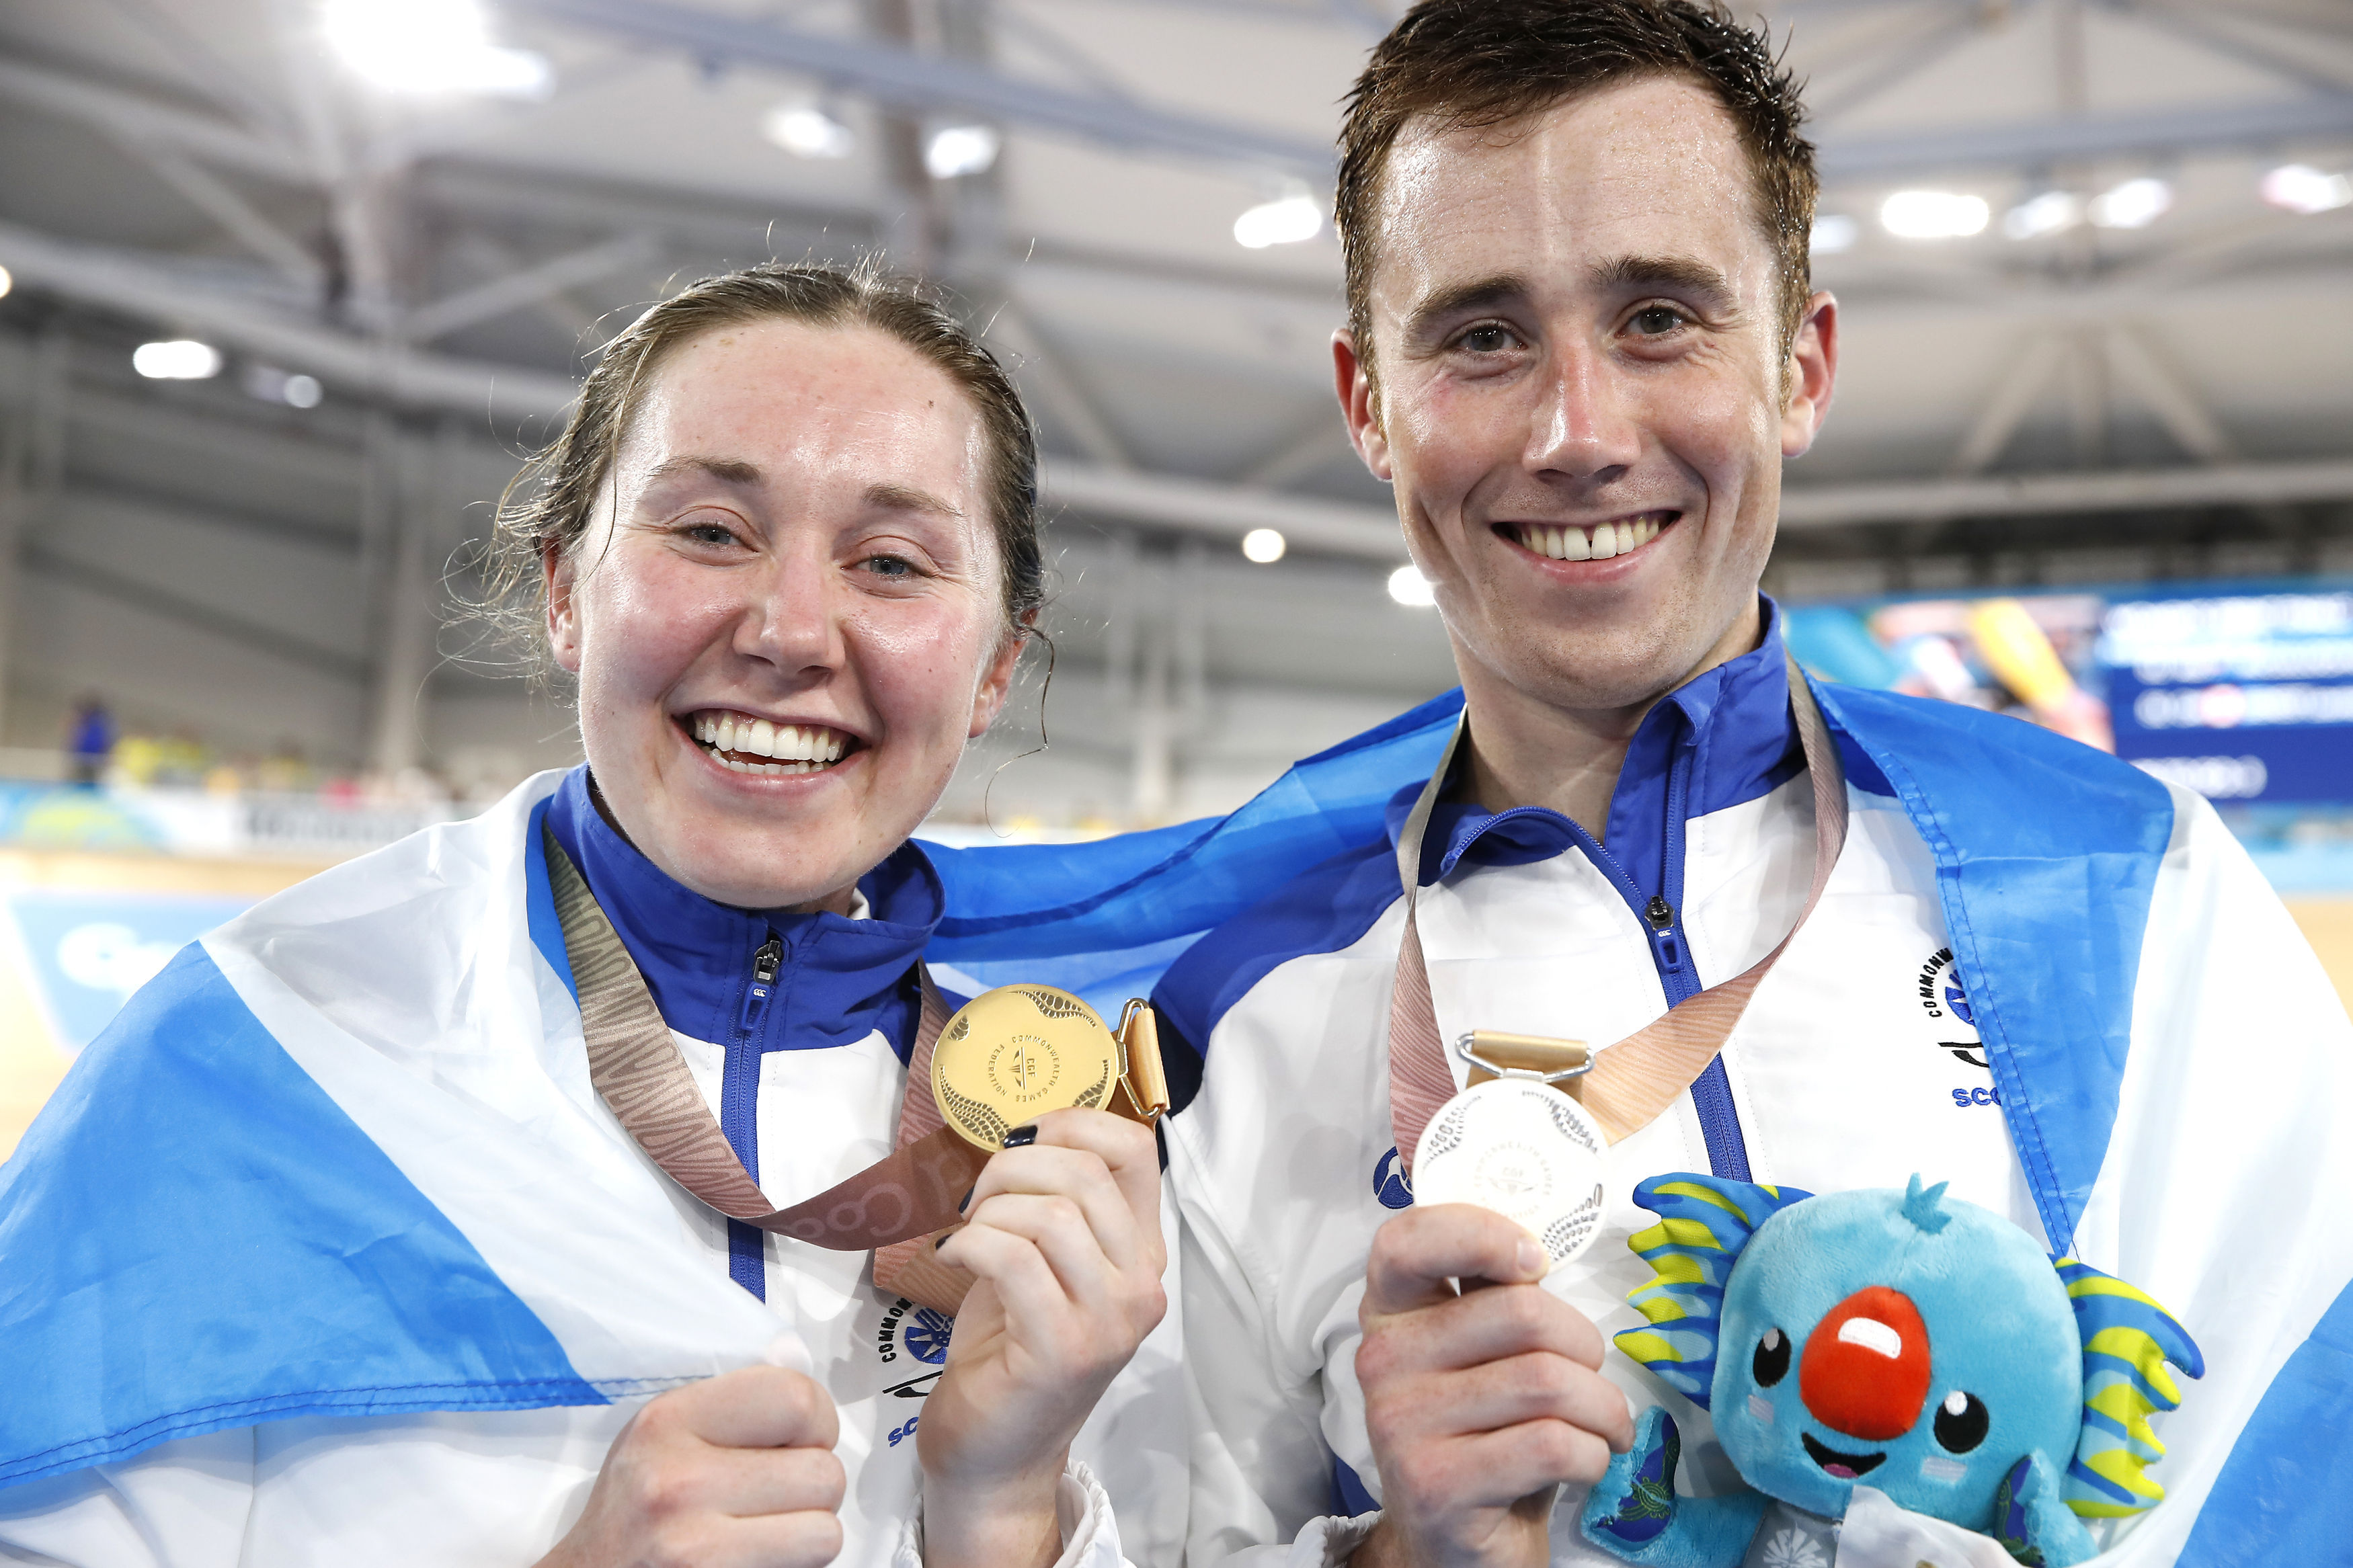 Brother and sister John and Katie Archibald will compete in the Tour Series event in Aberdeen tomorrow.